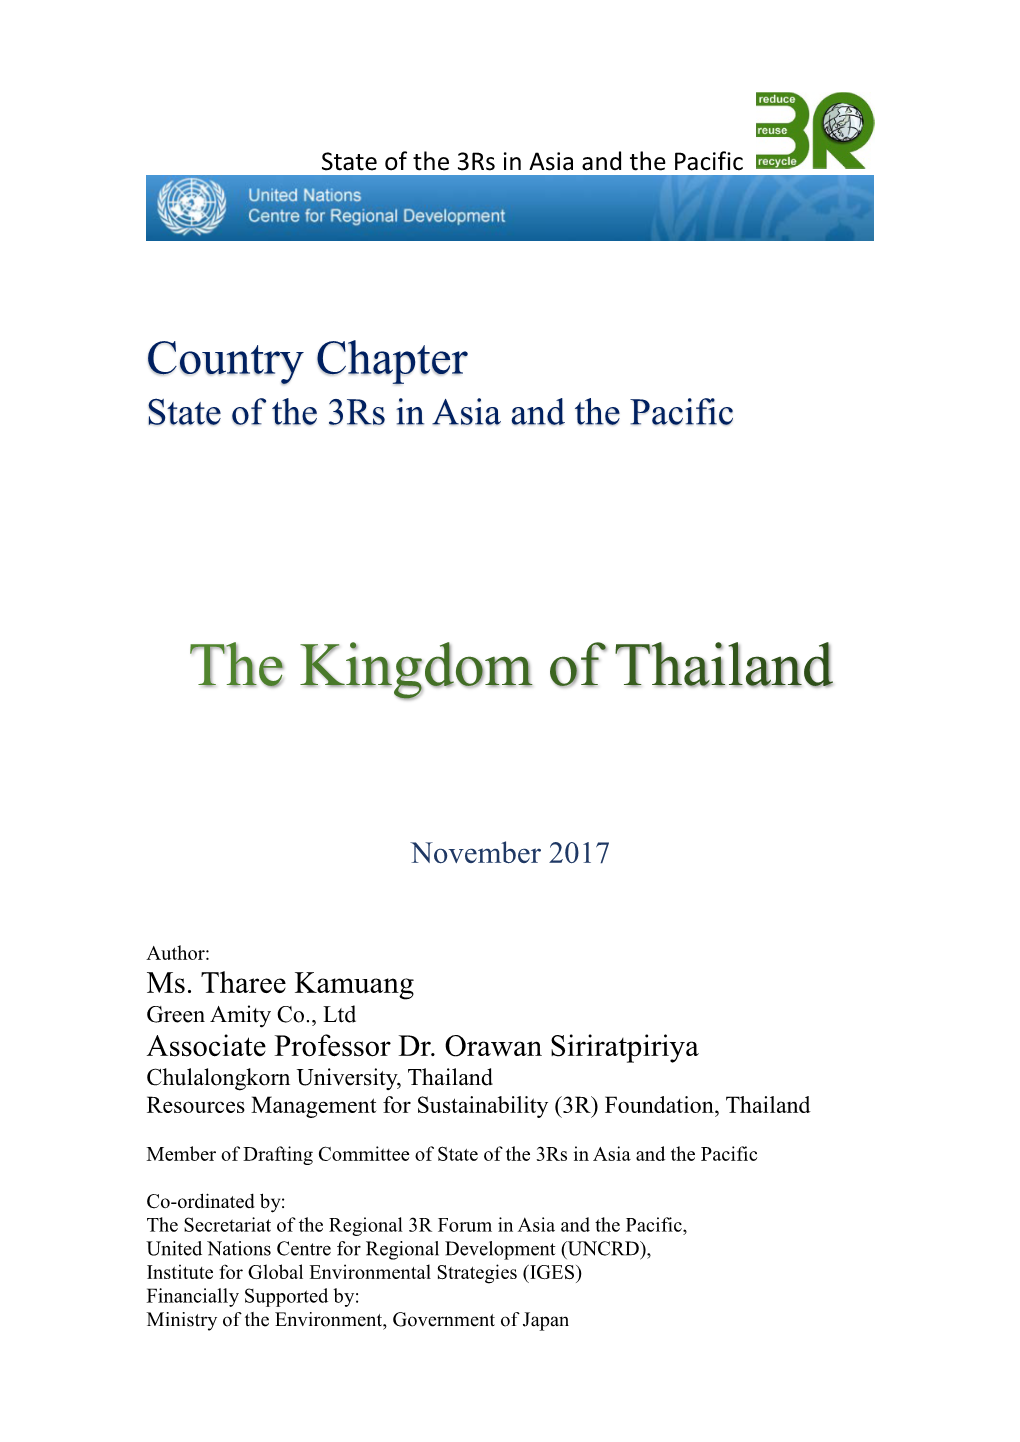 Country Chapter State of the 3Rs in Asia and the Pacific